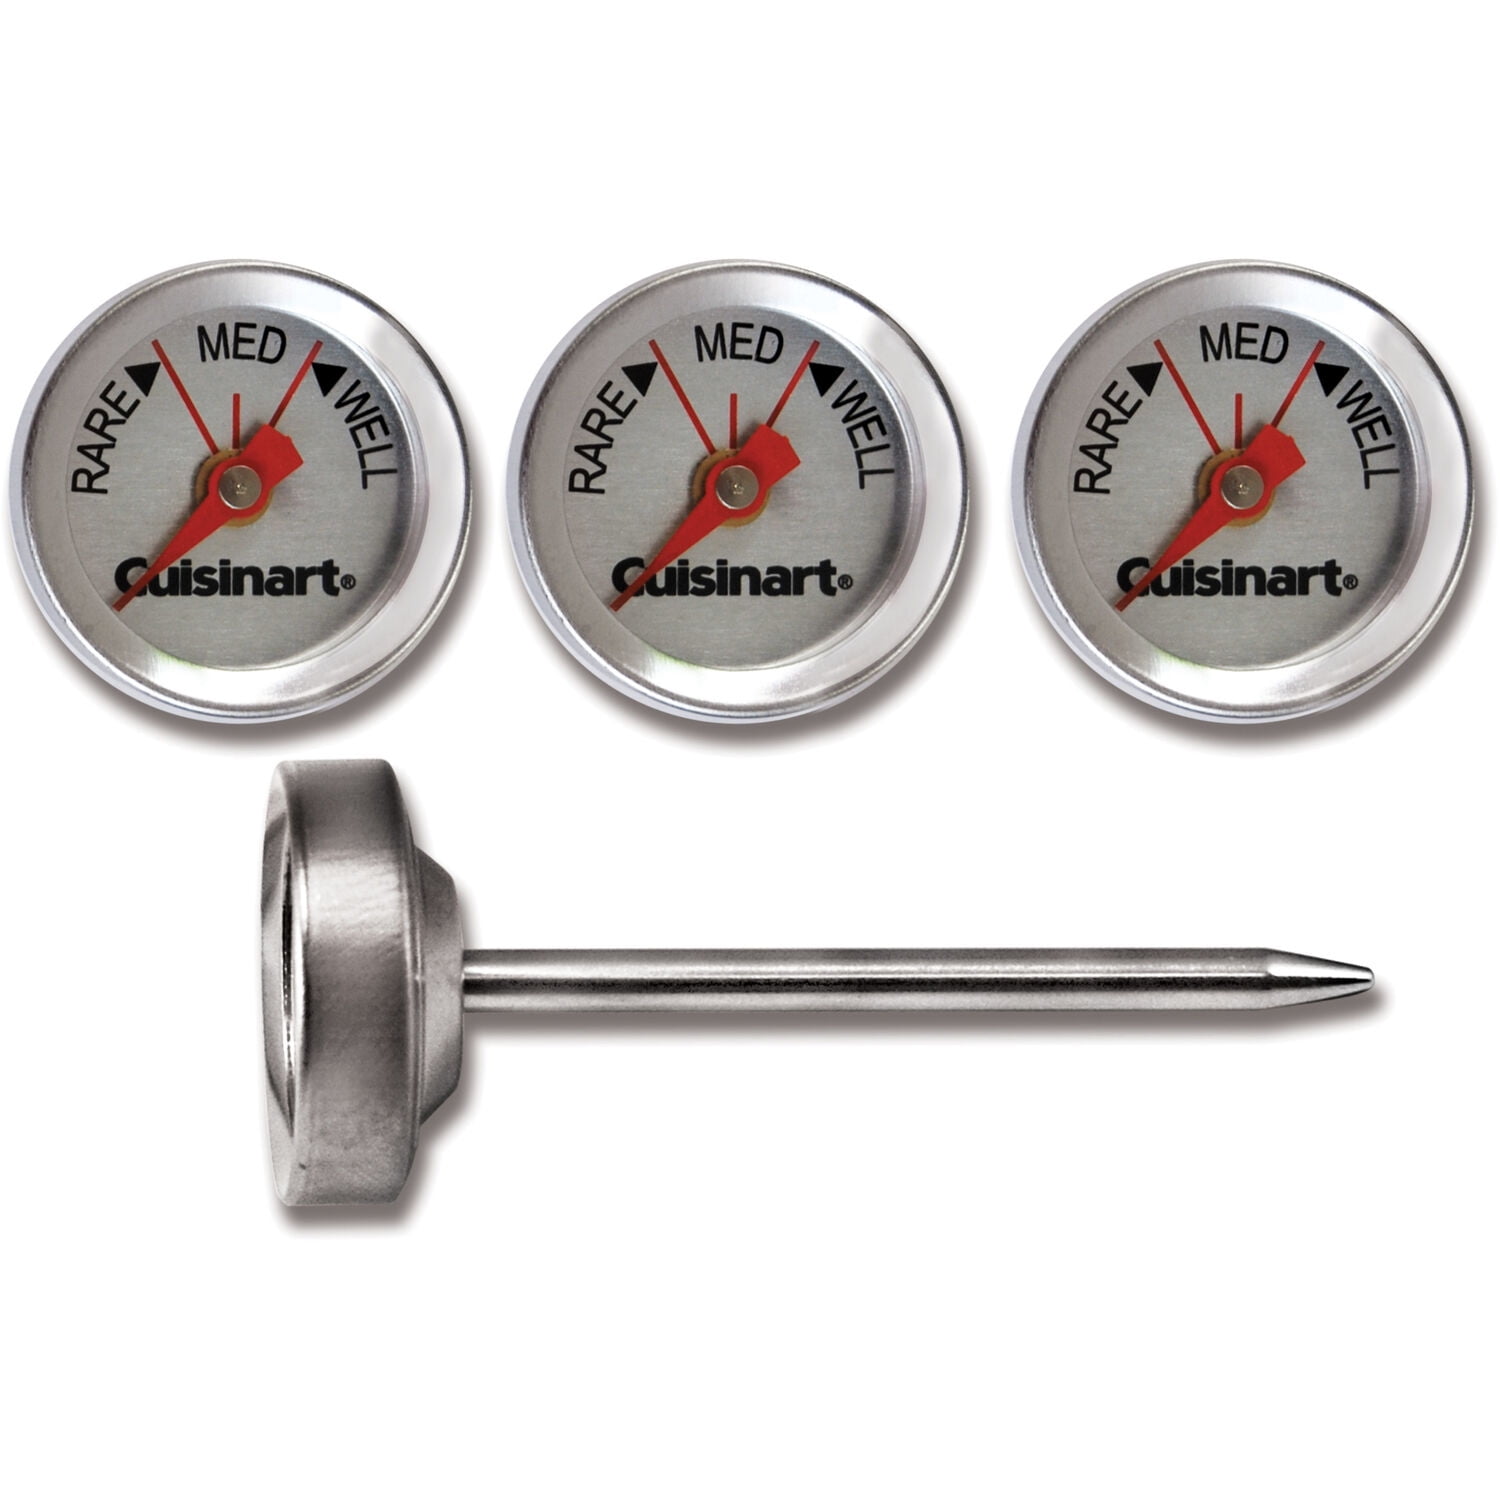 NEW IN BOX! TOTES 3 PIECE BBQ THERMOMETER SET W/booklet STAINLESS STEEL! 